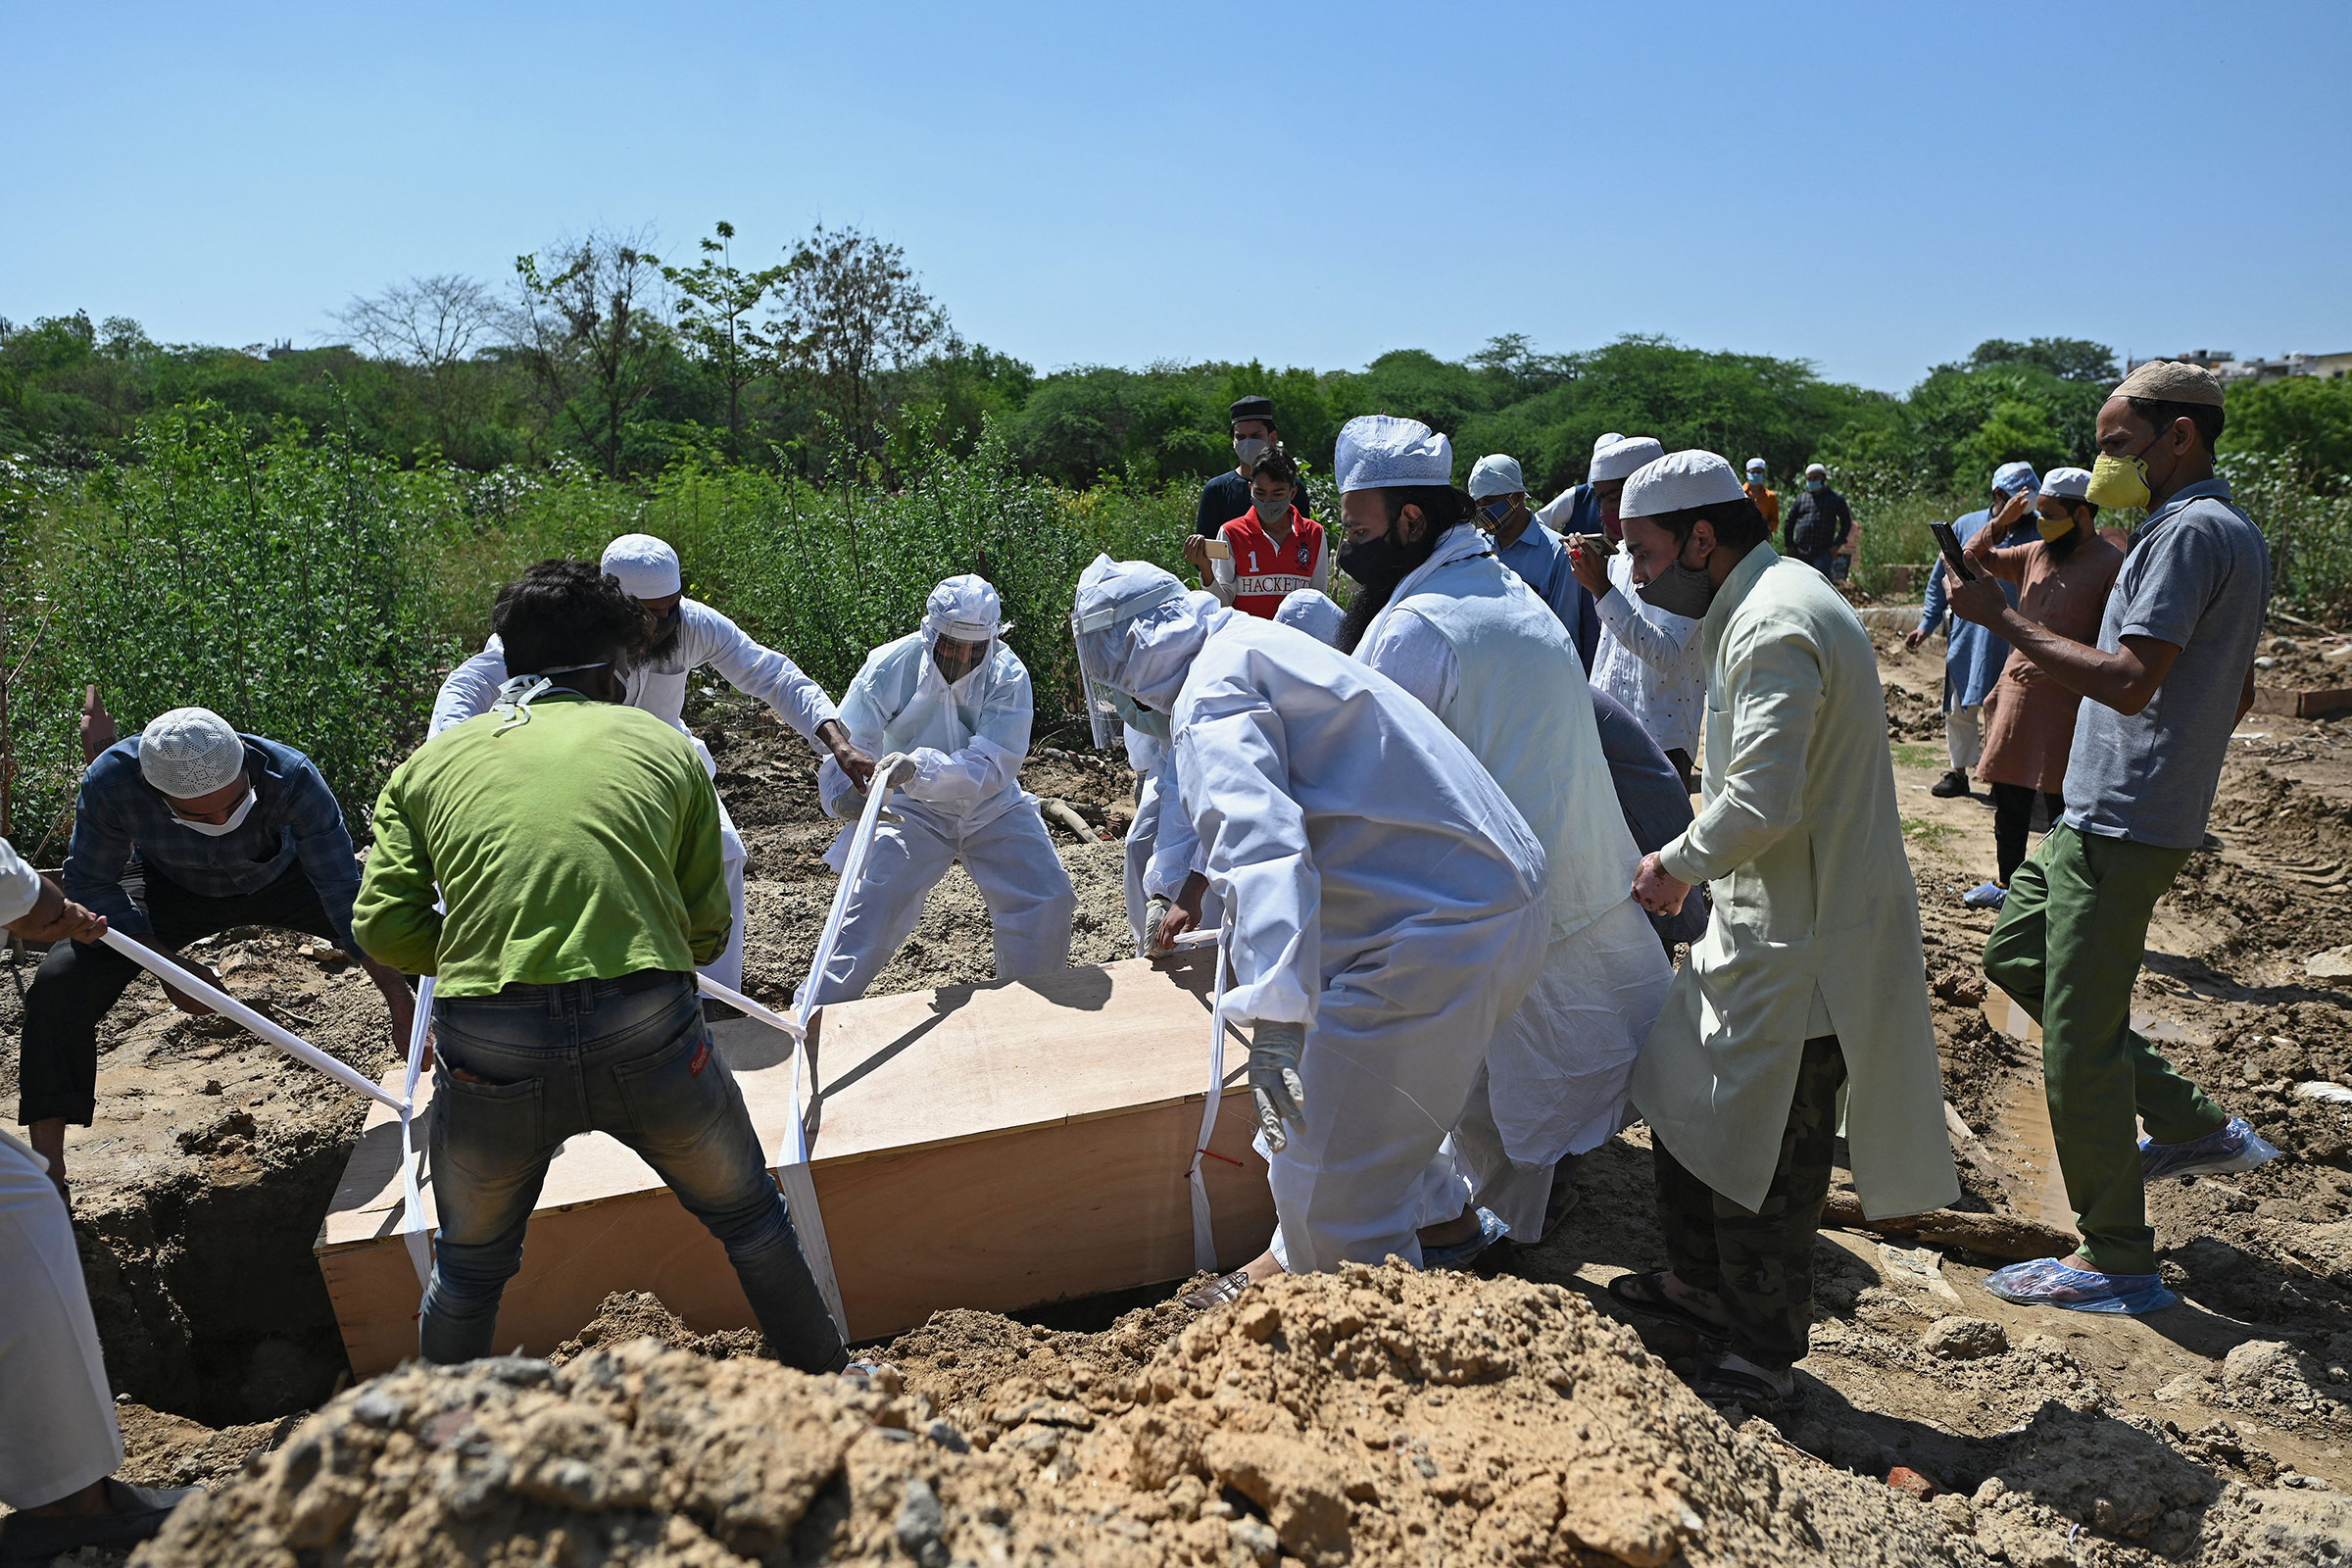 Relatives bury the body of a Covid-19 victim at a graveyard in New Delhi, on May 22. 